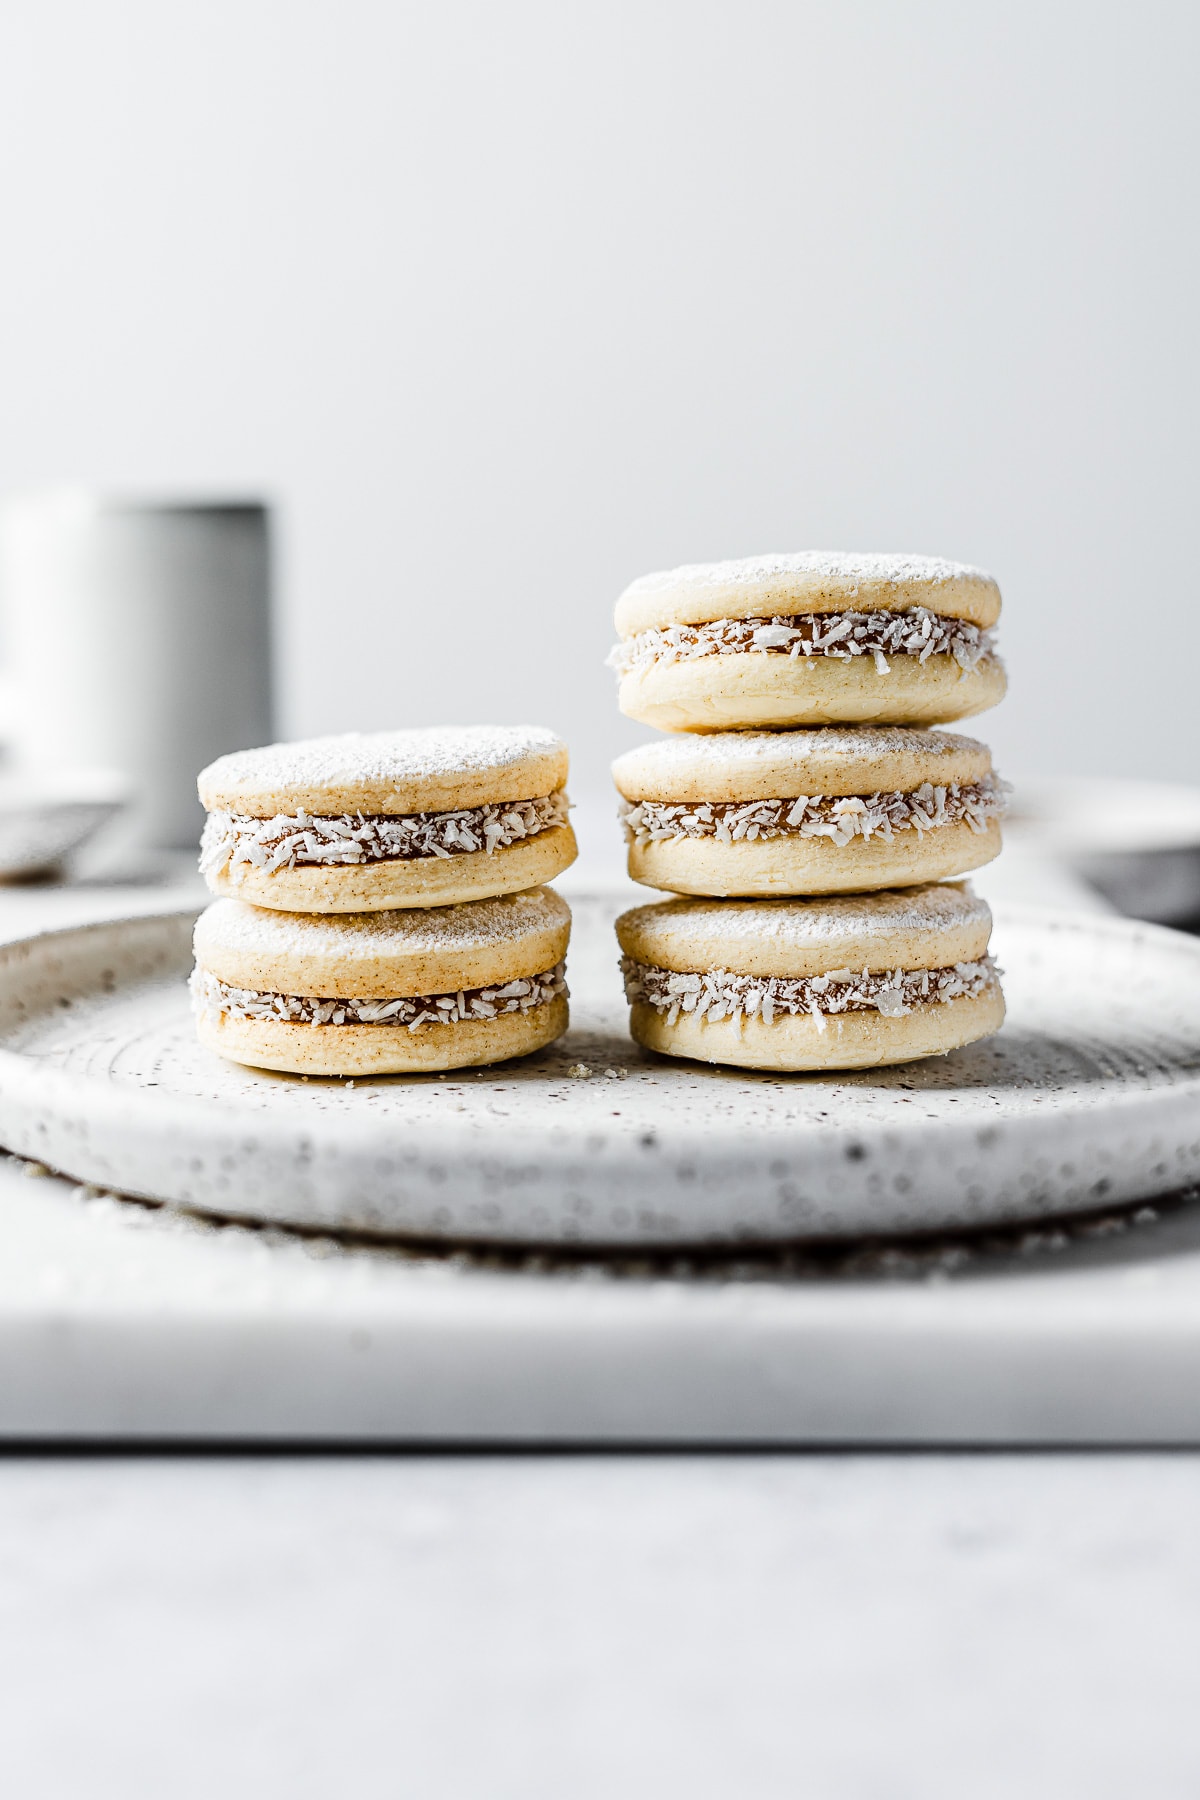 Two stacks of Argentine alfajores de maicena on a white ceramic plate resting on a white marble board.